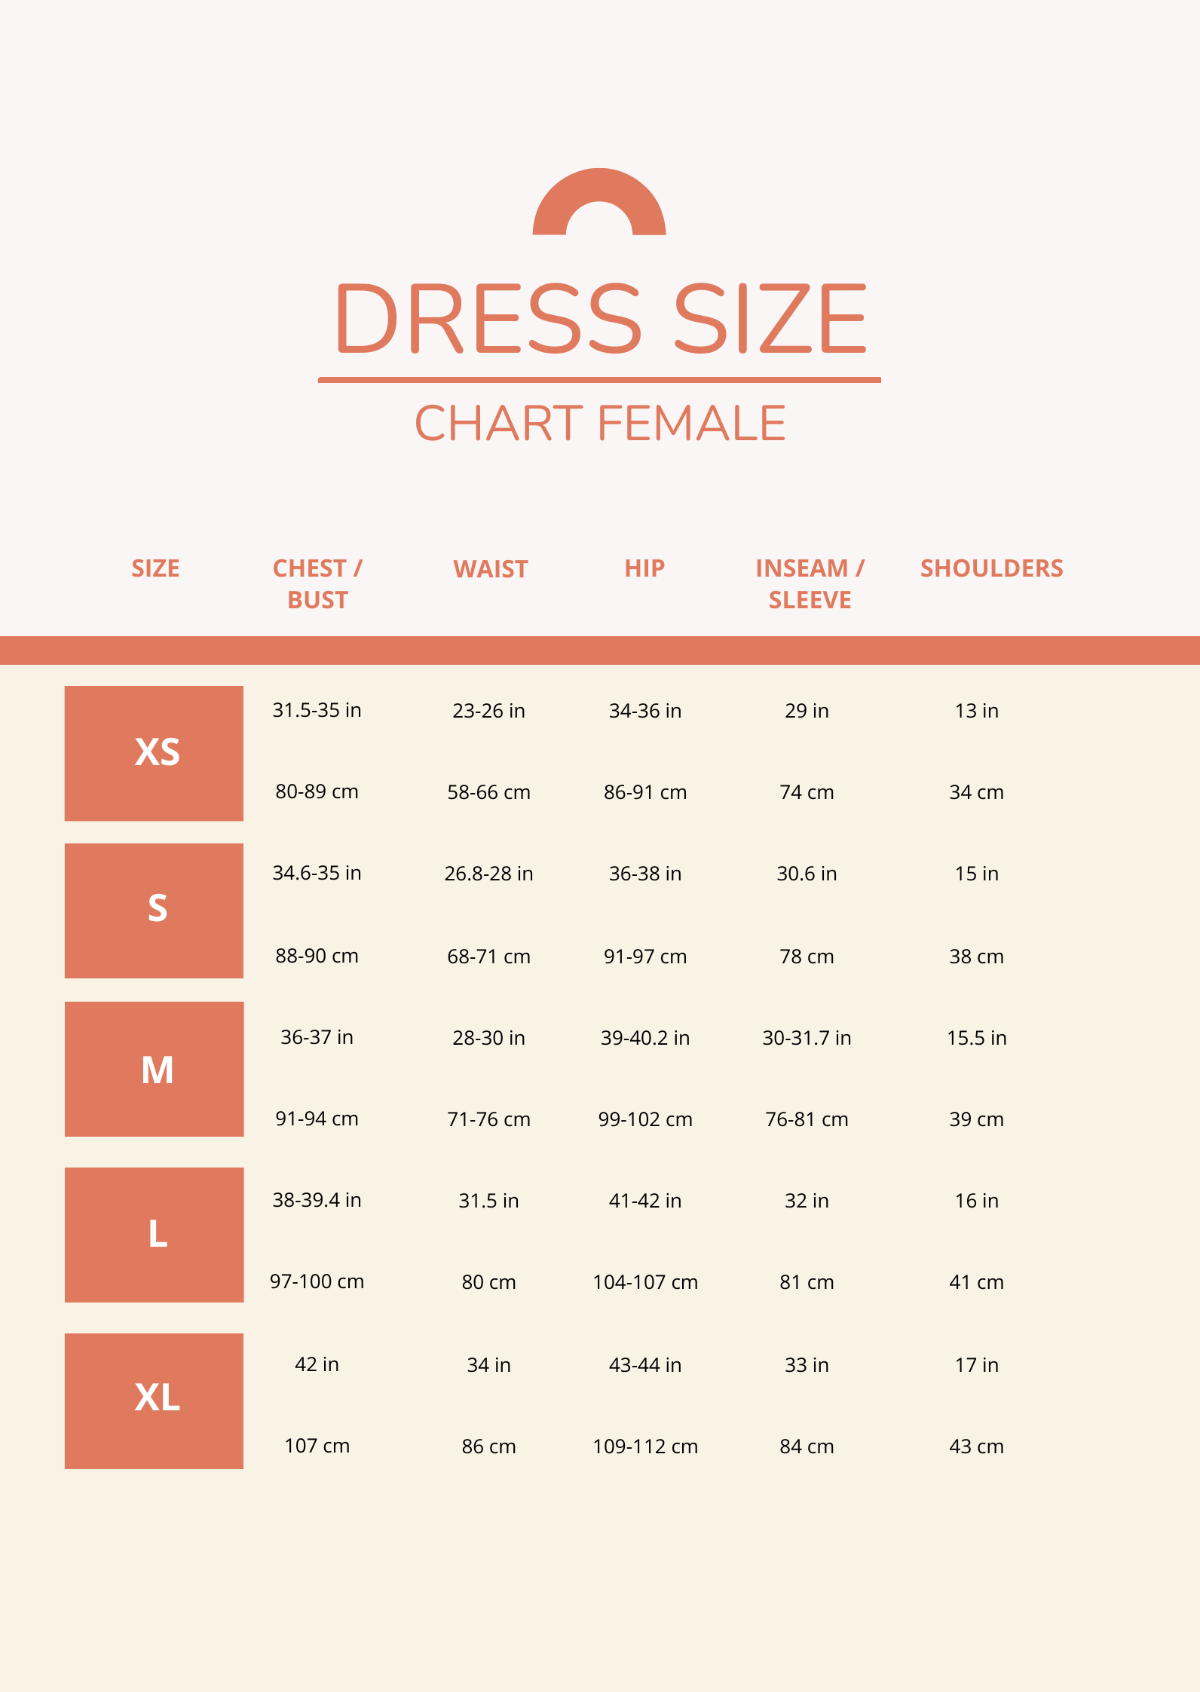 Dress Size Chart Female Template - Edit Online & Download Example ...